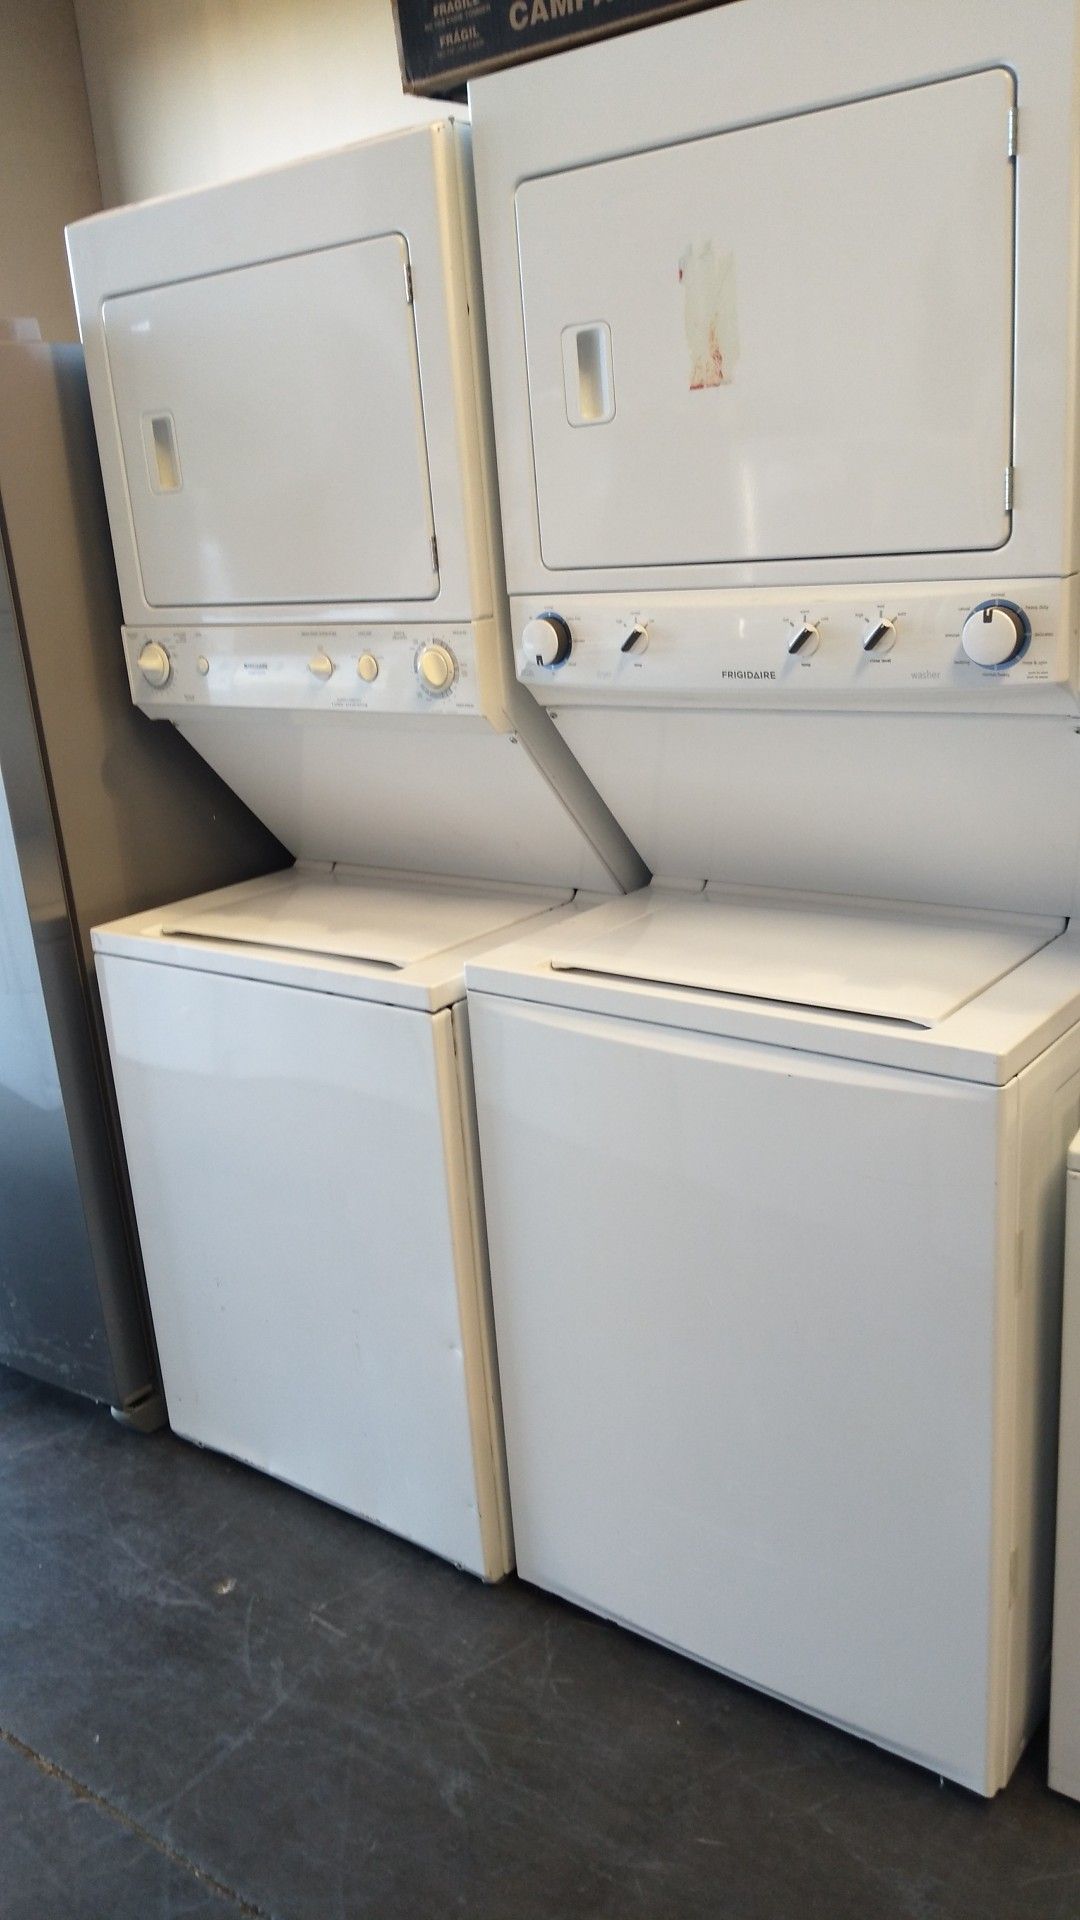 Used/Refurbished Stackable 27" Washer & Dryer (Electric or gas)